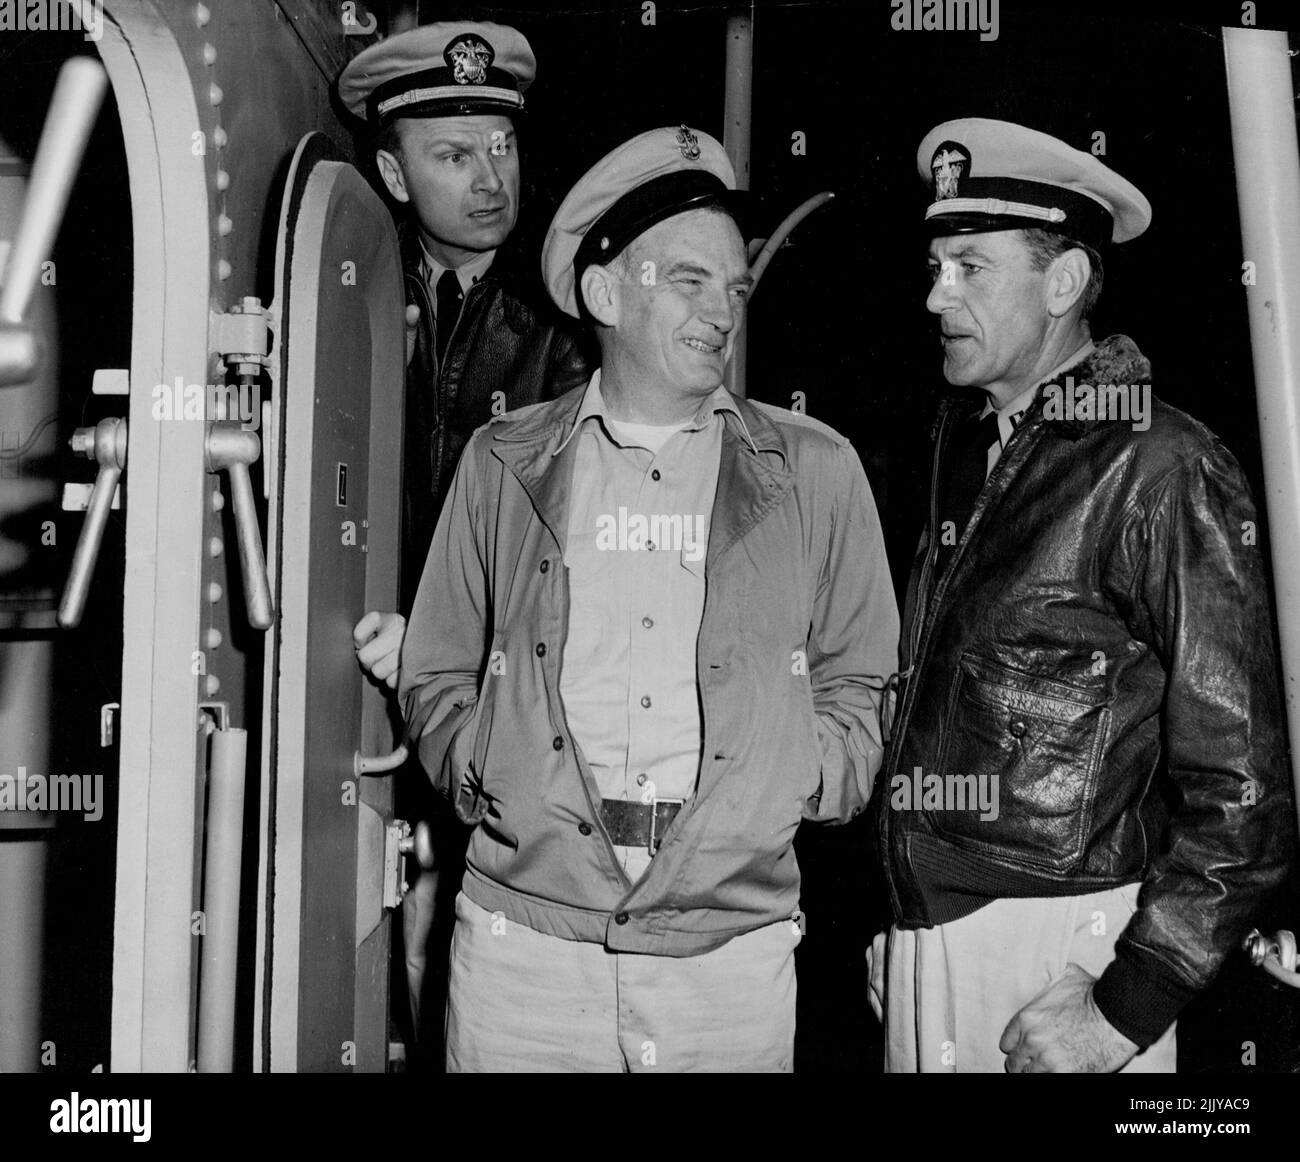 Bosun Larrabee (Millard Mitchell), centre, mistakes Harkness for a navy 'regular'; commiserates with him for landing on a 'teakettle' manned by green ox-civilians. Larrabee is the only man aboard with sea experience and even the first officer, Et.J.G. Bill Barron (Eddie Albert), left, is fresh out of training school. October 20, 1953. Stock Photo